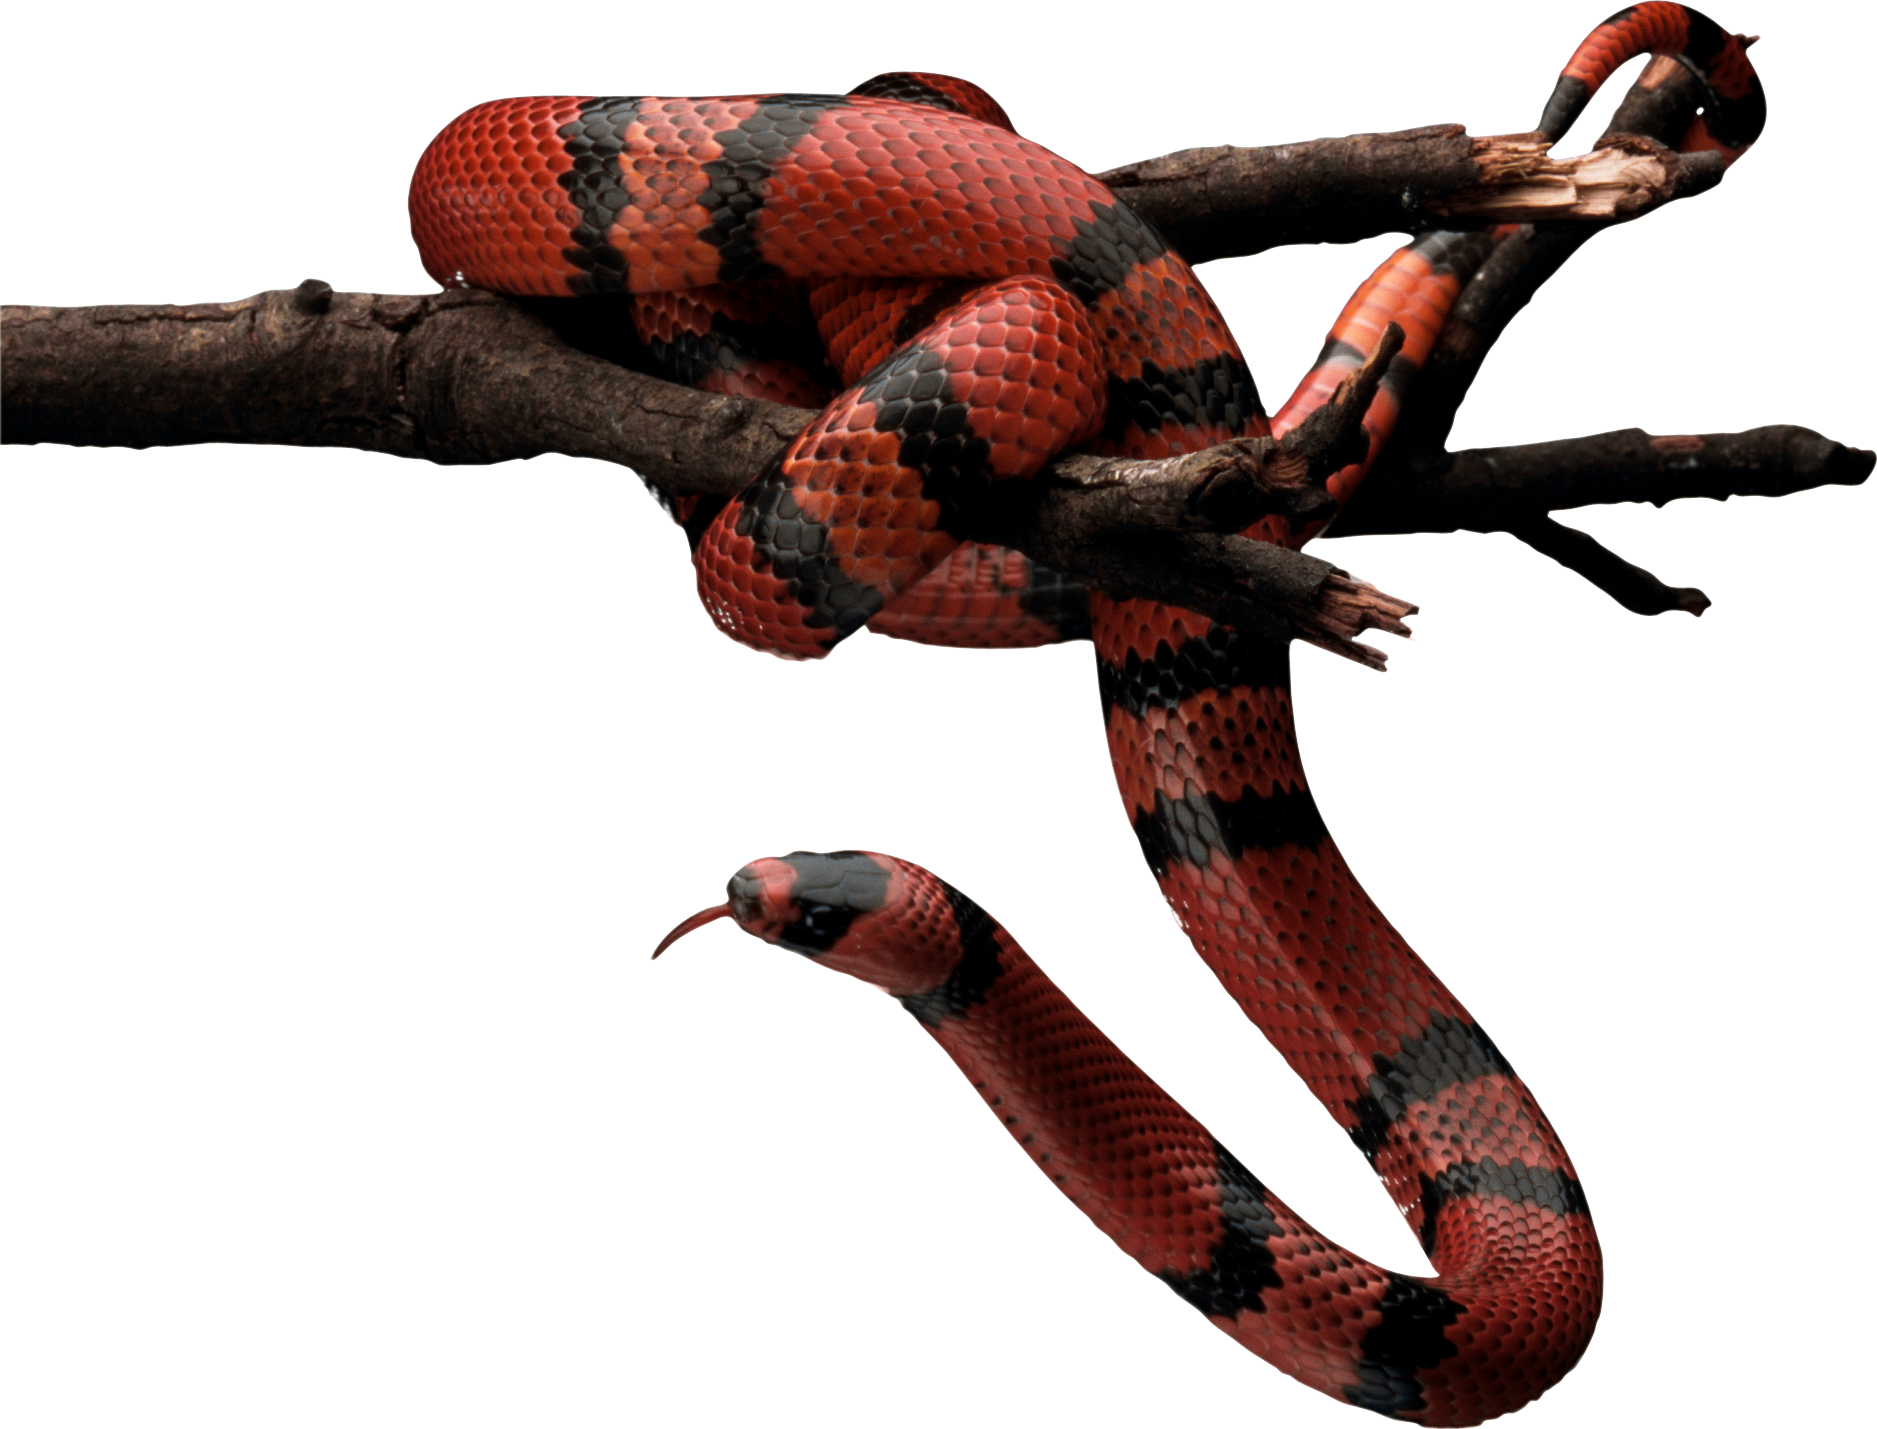 Red snake PNG image picture download free